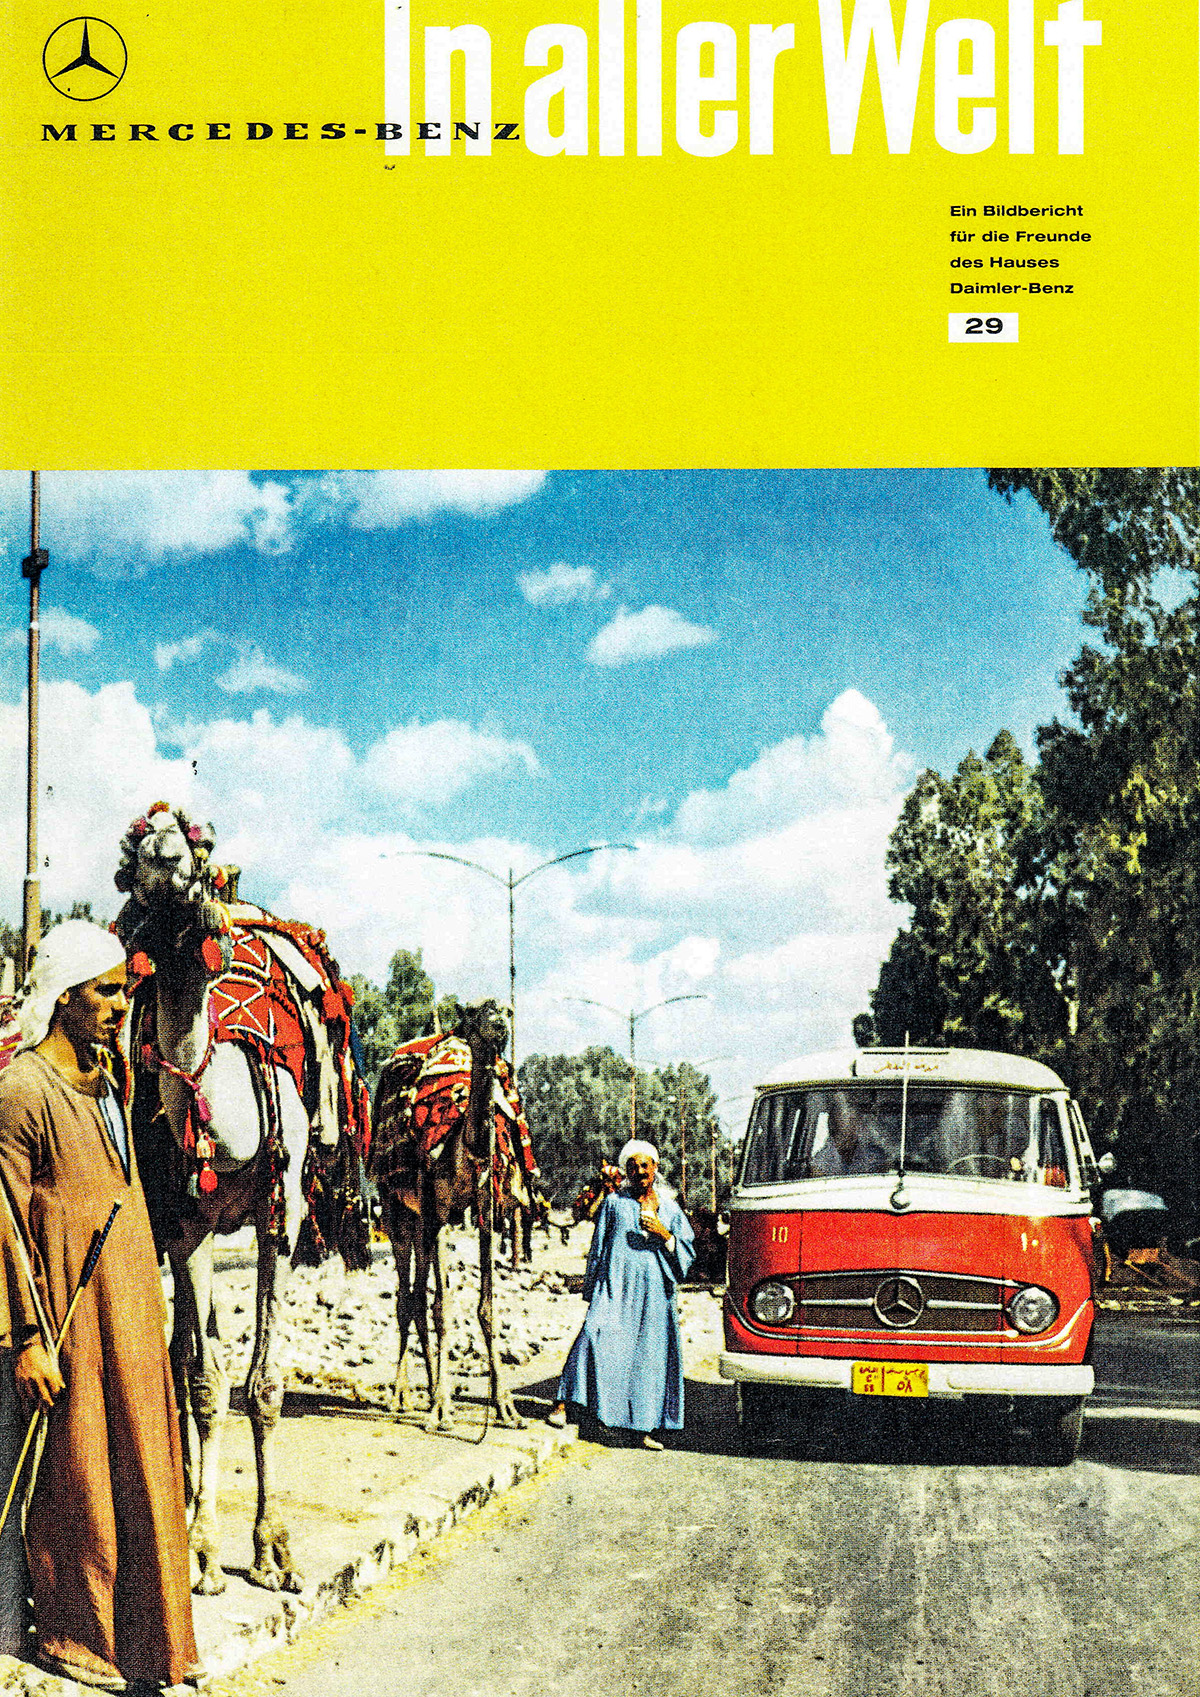 The cover of Mercedes-Benz Magazine, issue 29